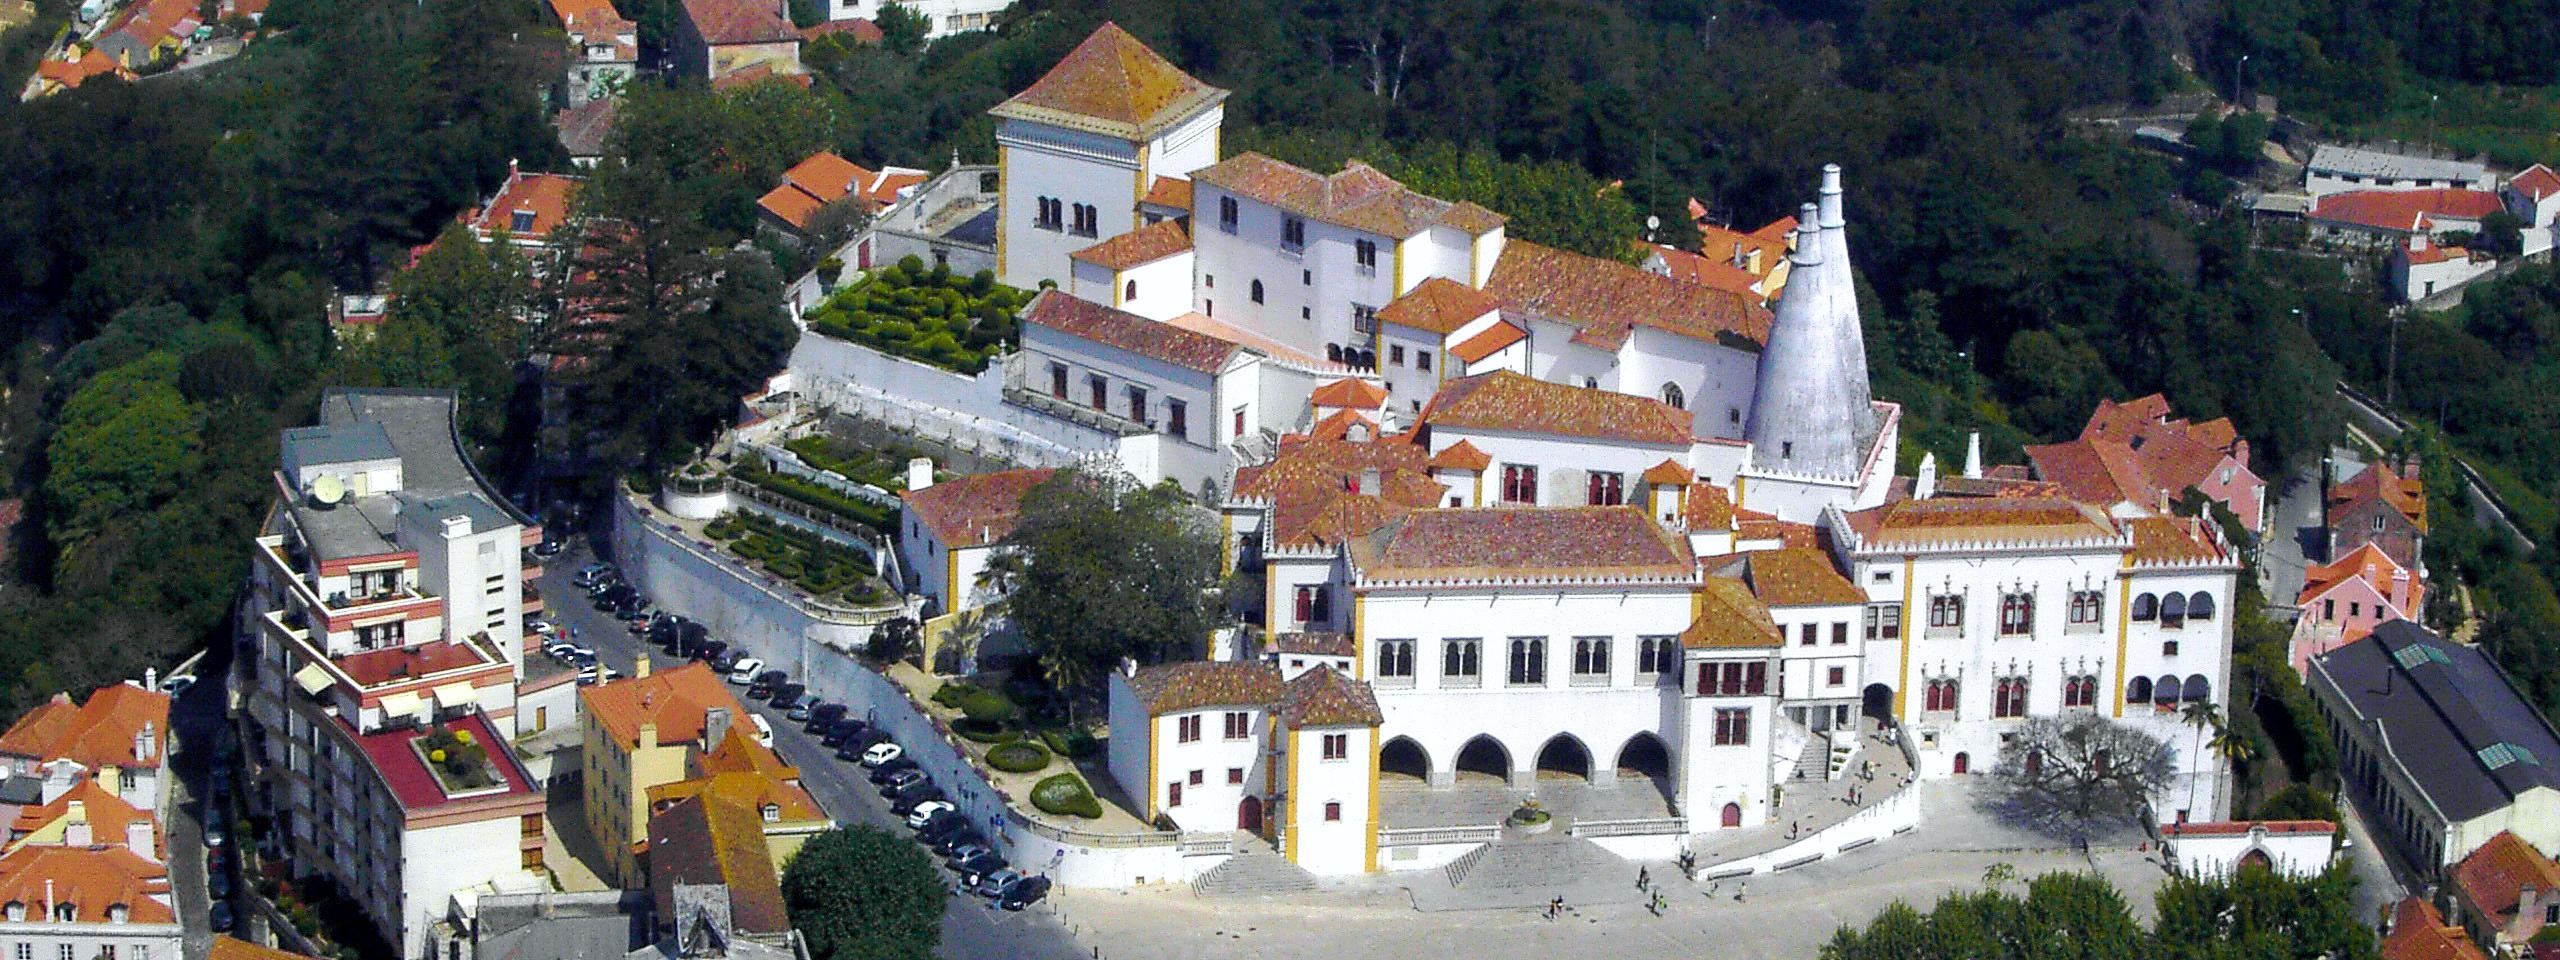 Sintra National Palace viewed from the Moorish Castle